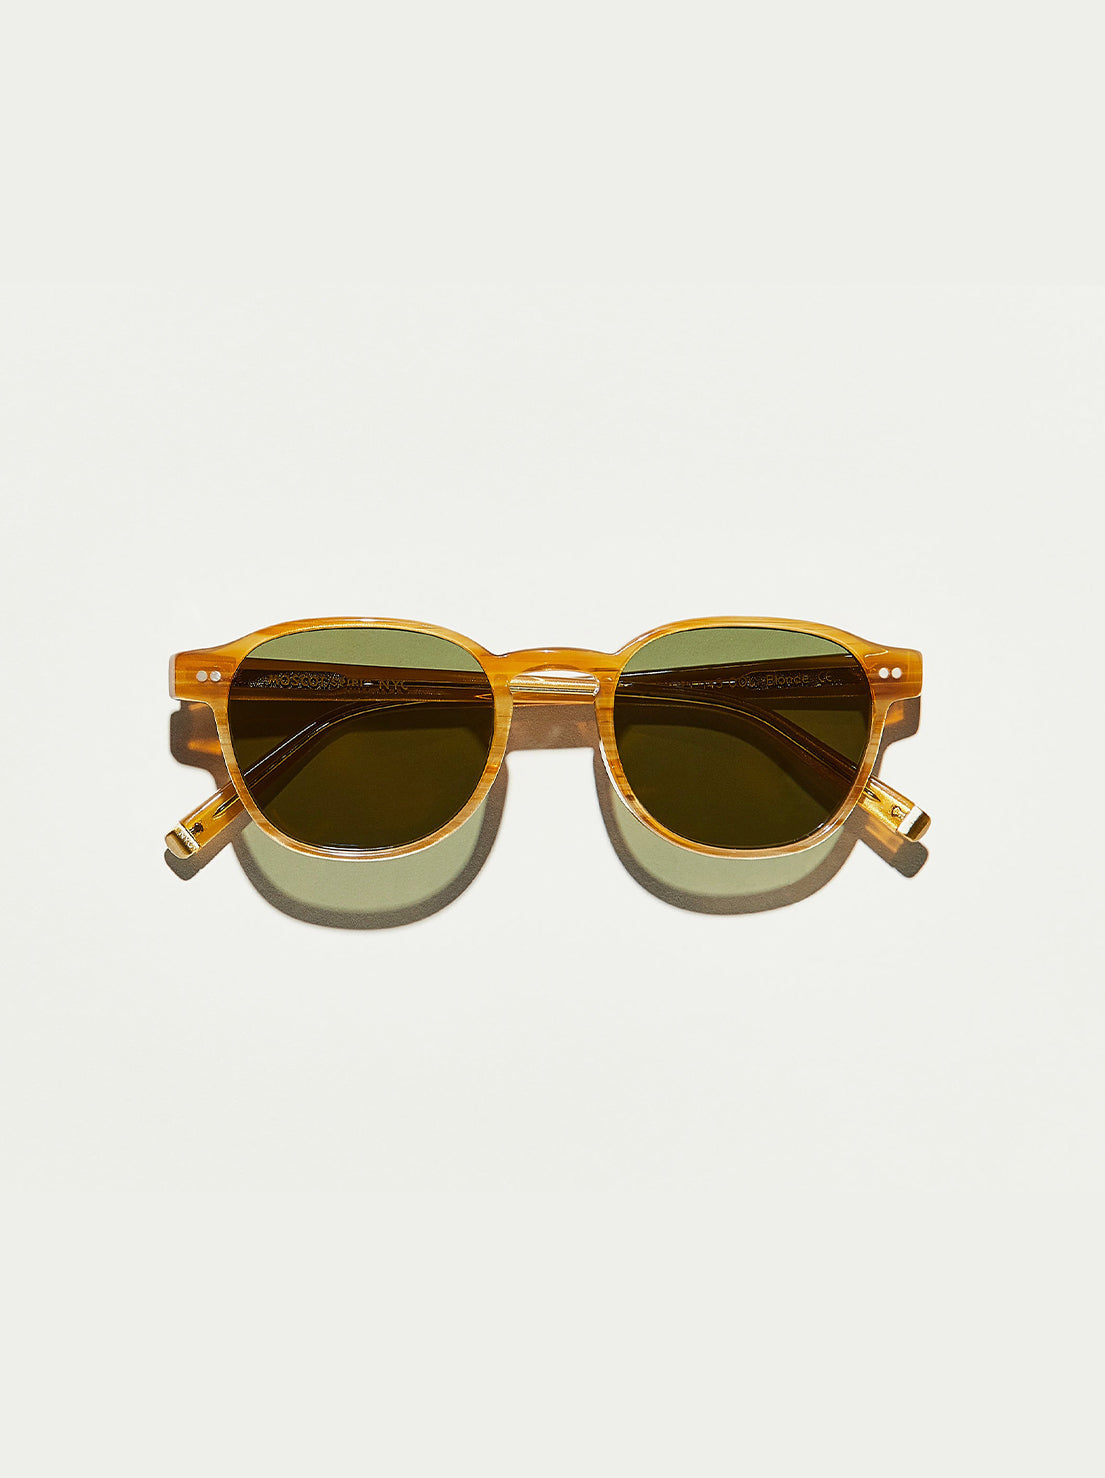 Moscot - Arthur Sunglasses in Blonde 50 (Wide) - CR-39 Green Lens